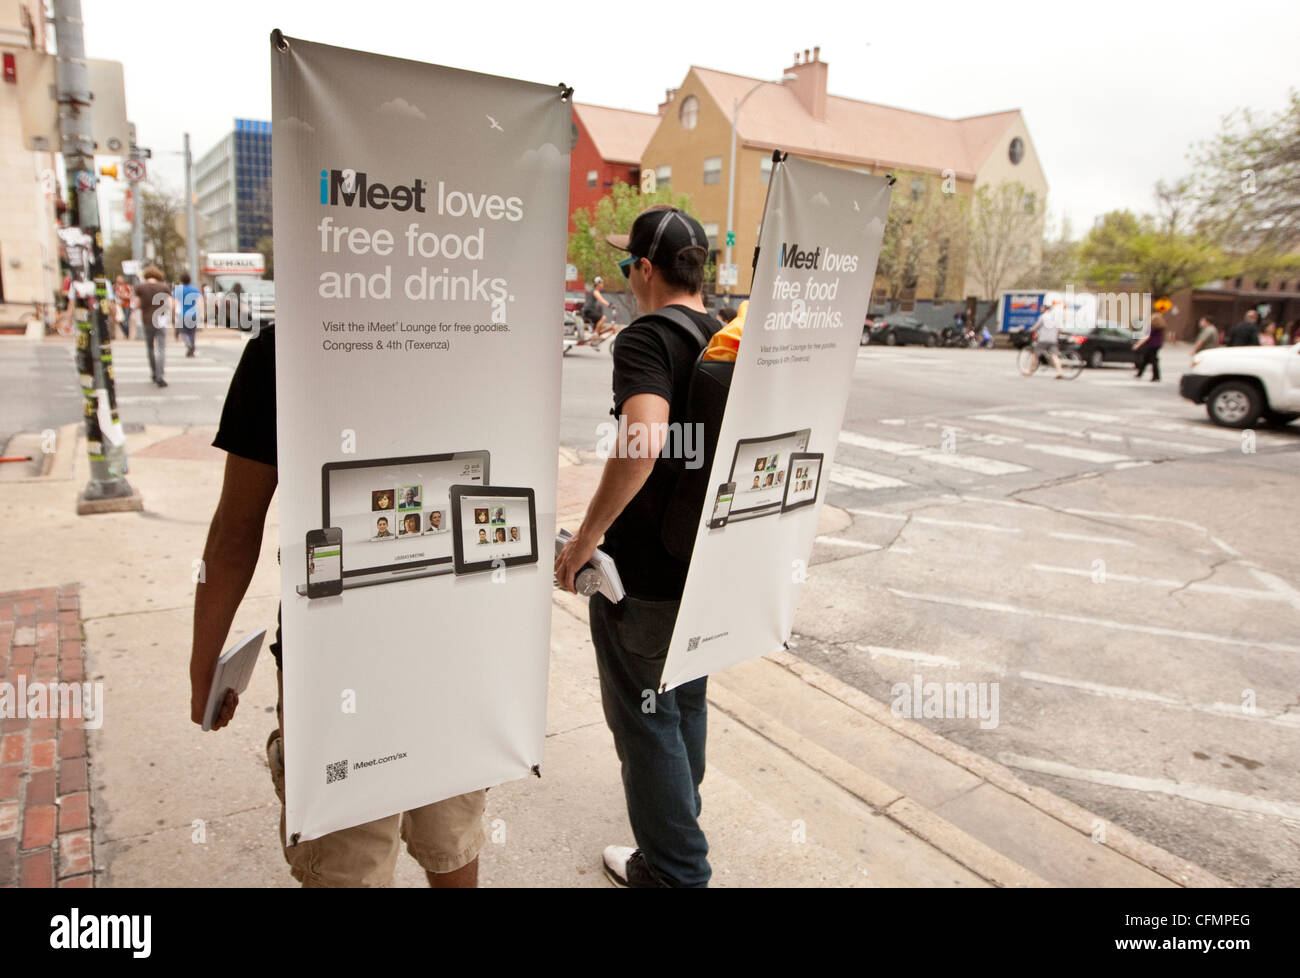 SXSW Interactive convention draws thousands. Companies use various methods of marketing to attract customers walking billboard Stock Photo